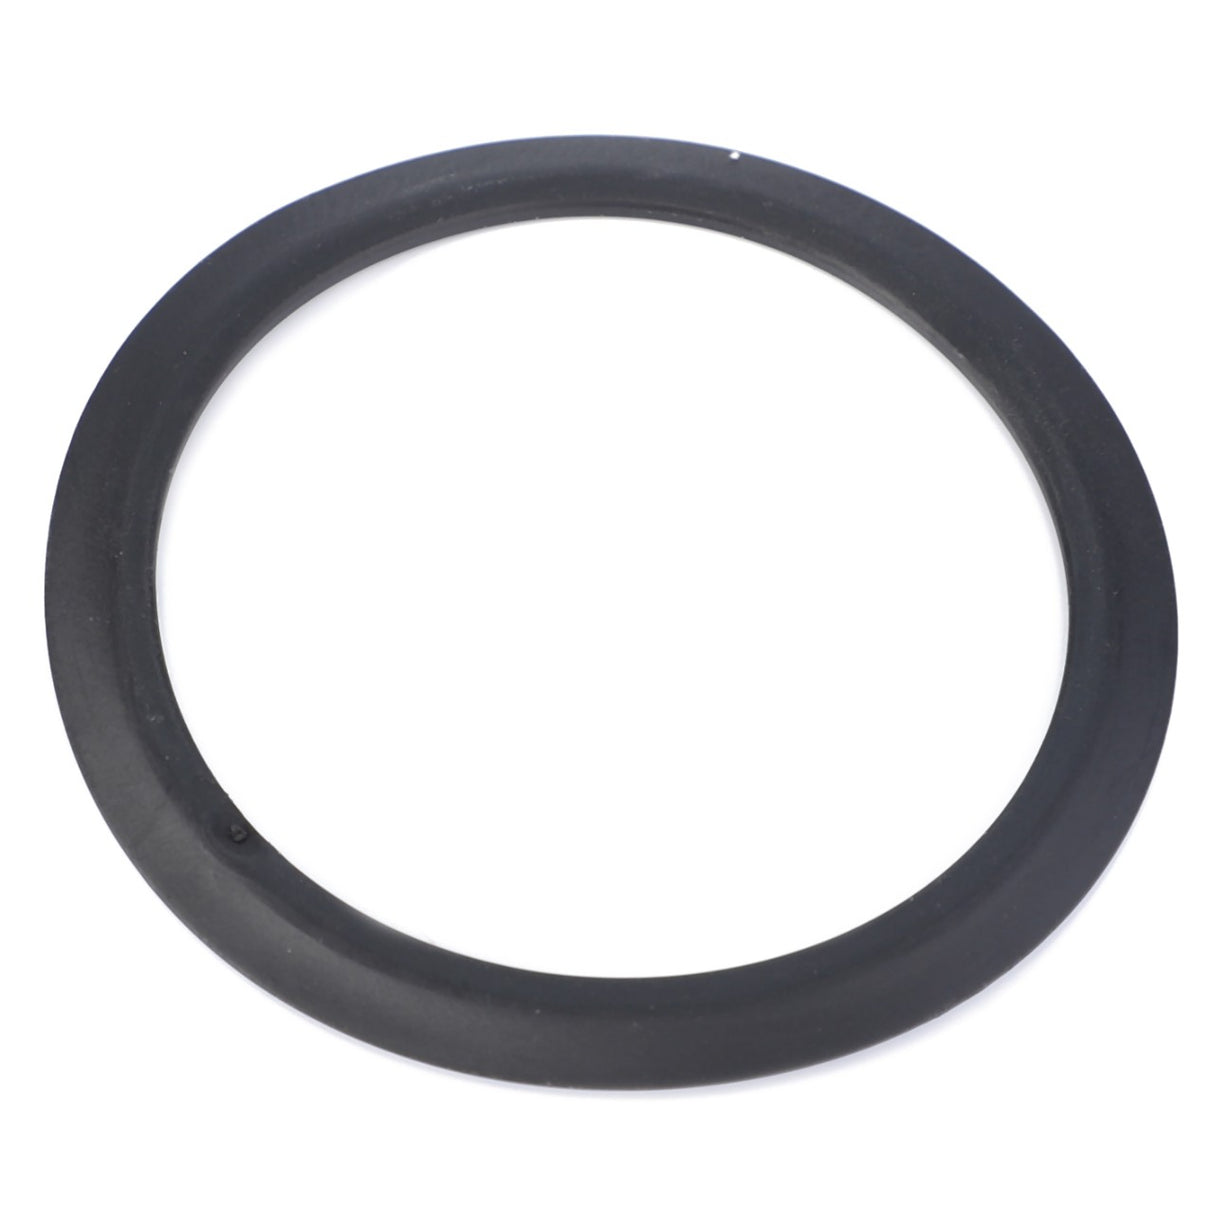 AGCO | Filter Gasket - 3903298M1 - Farming Parts